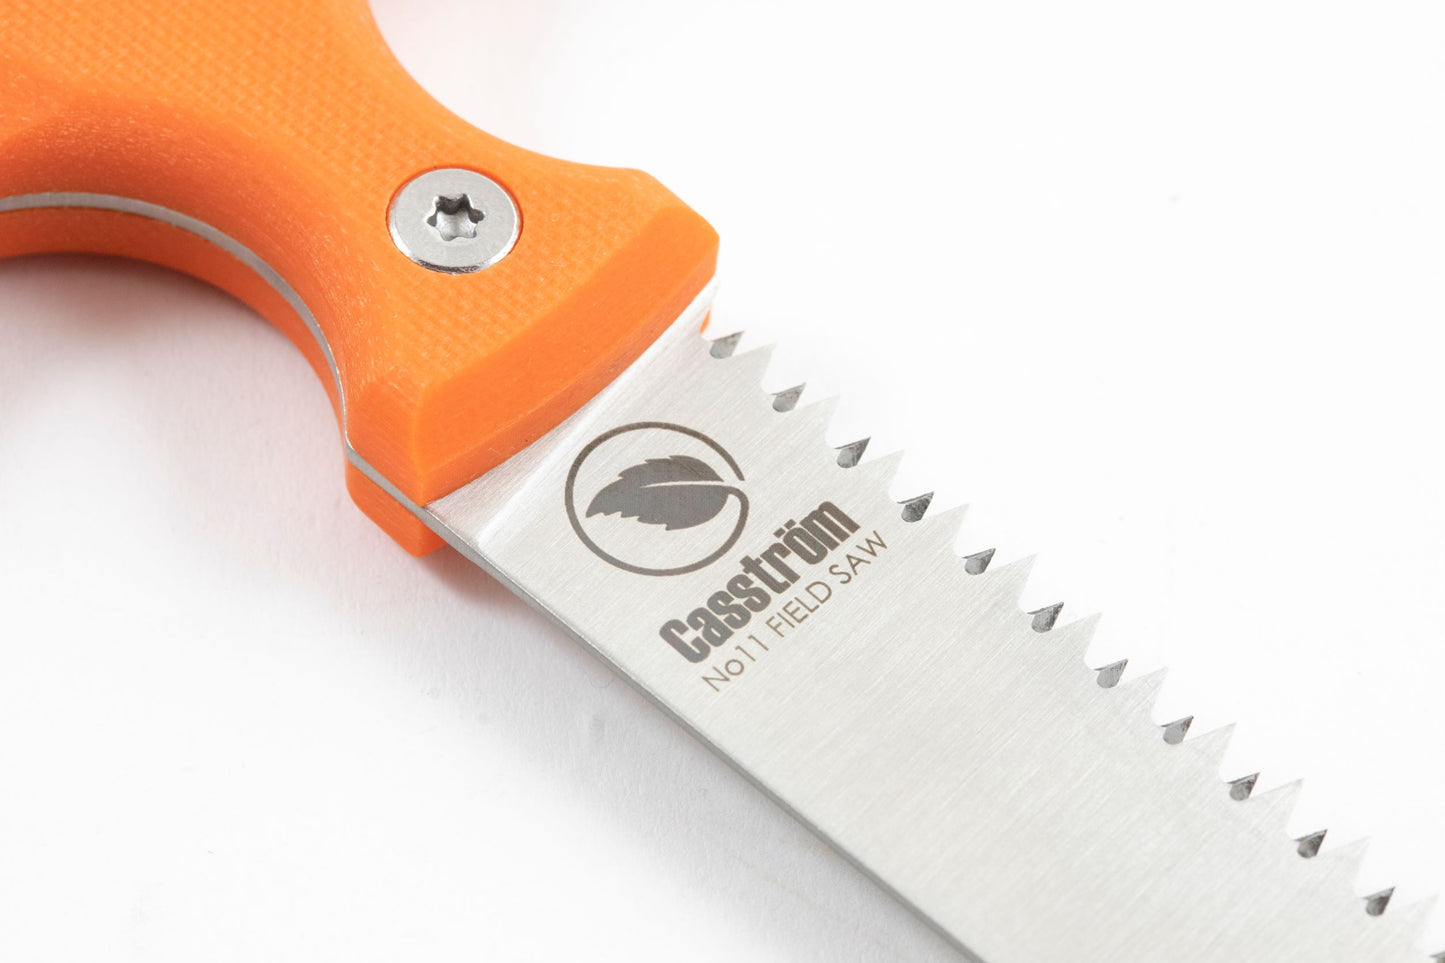 Close up of the Casstr;m No.11 Field Saw blade and sturdy fixing to the orange handle